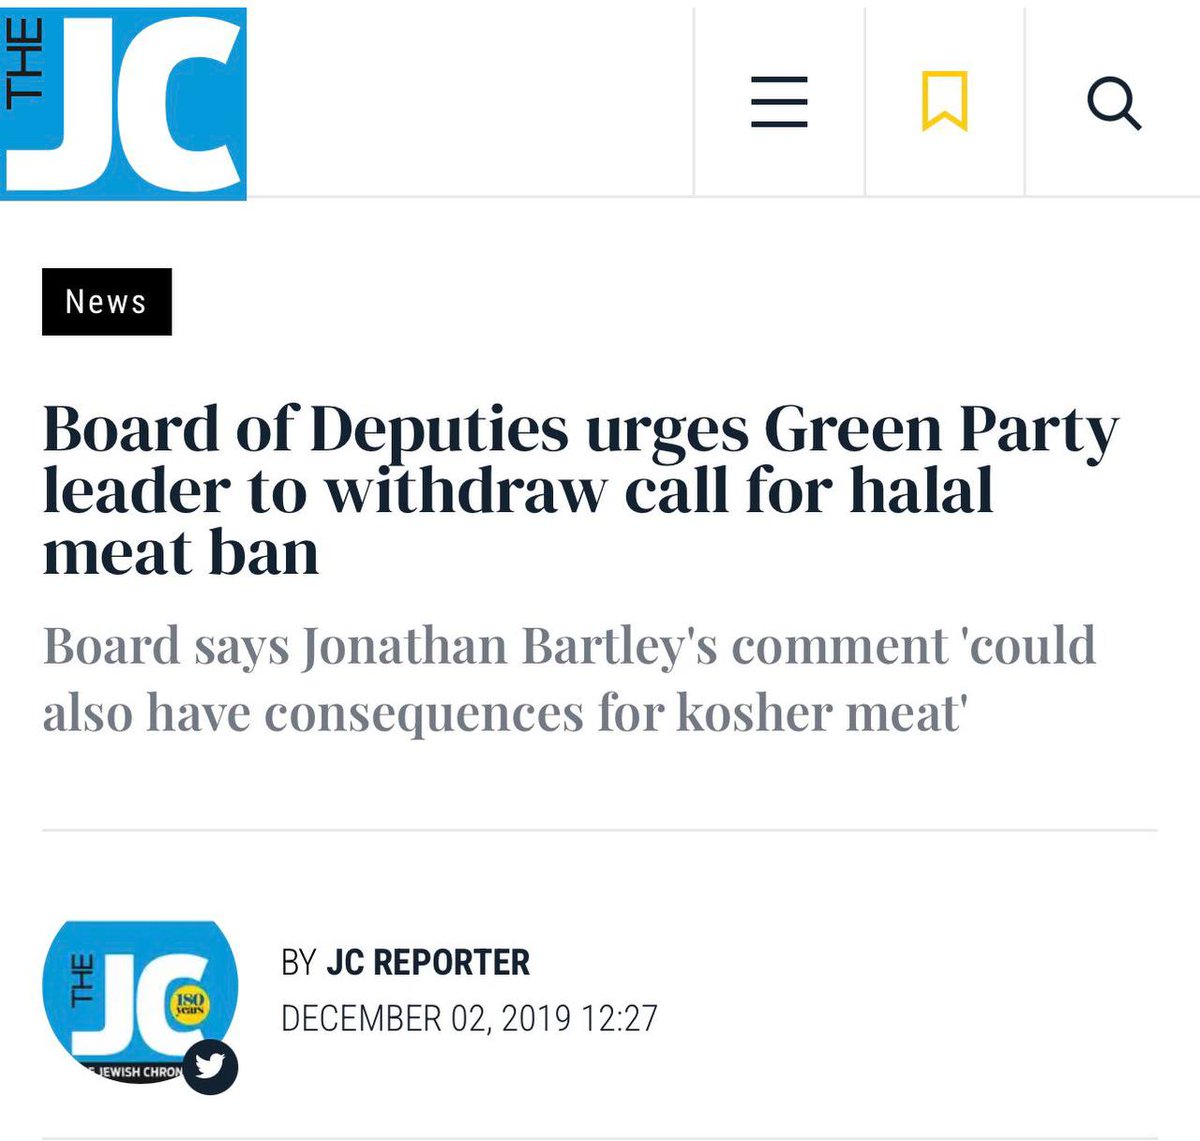 The new Green Party councillor has said his critics are Islamophobic. 

Didn’t see that one coming! 

I wonder if he thinks the party he represents are Islamophobic as the Greens once said they would ban halal slaughter until that was shut down by Tel Aviv. 

It would be…